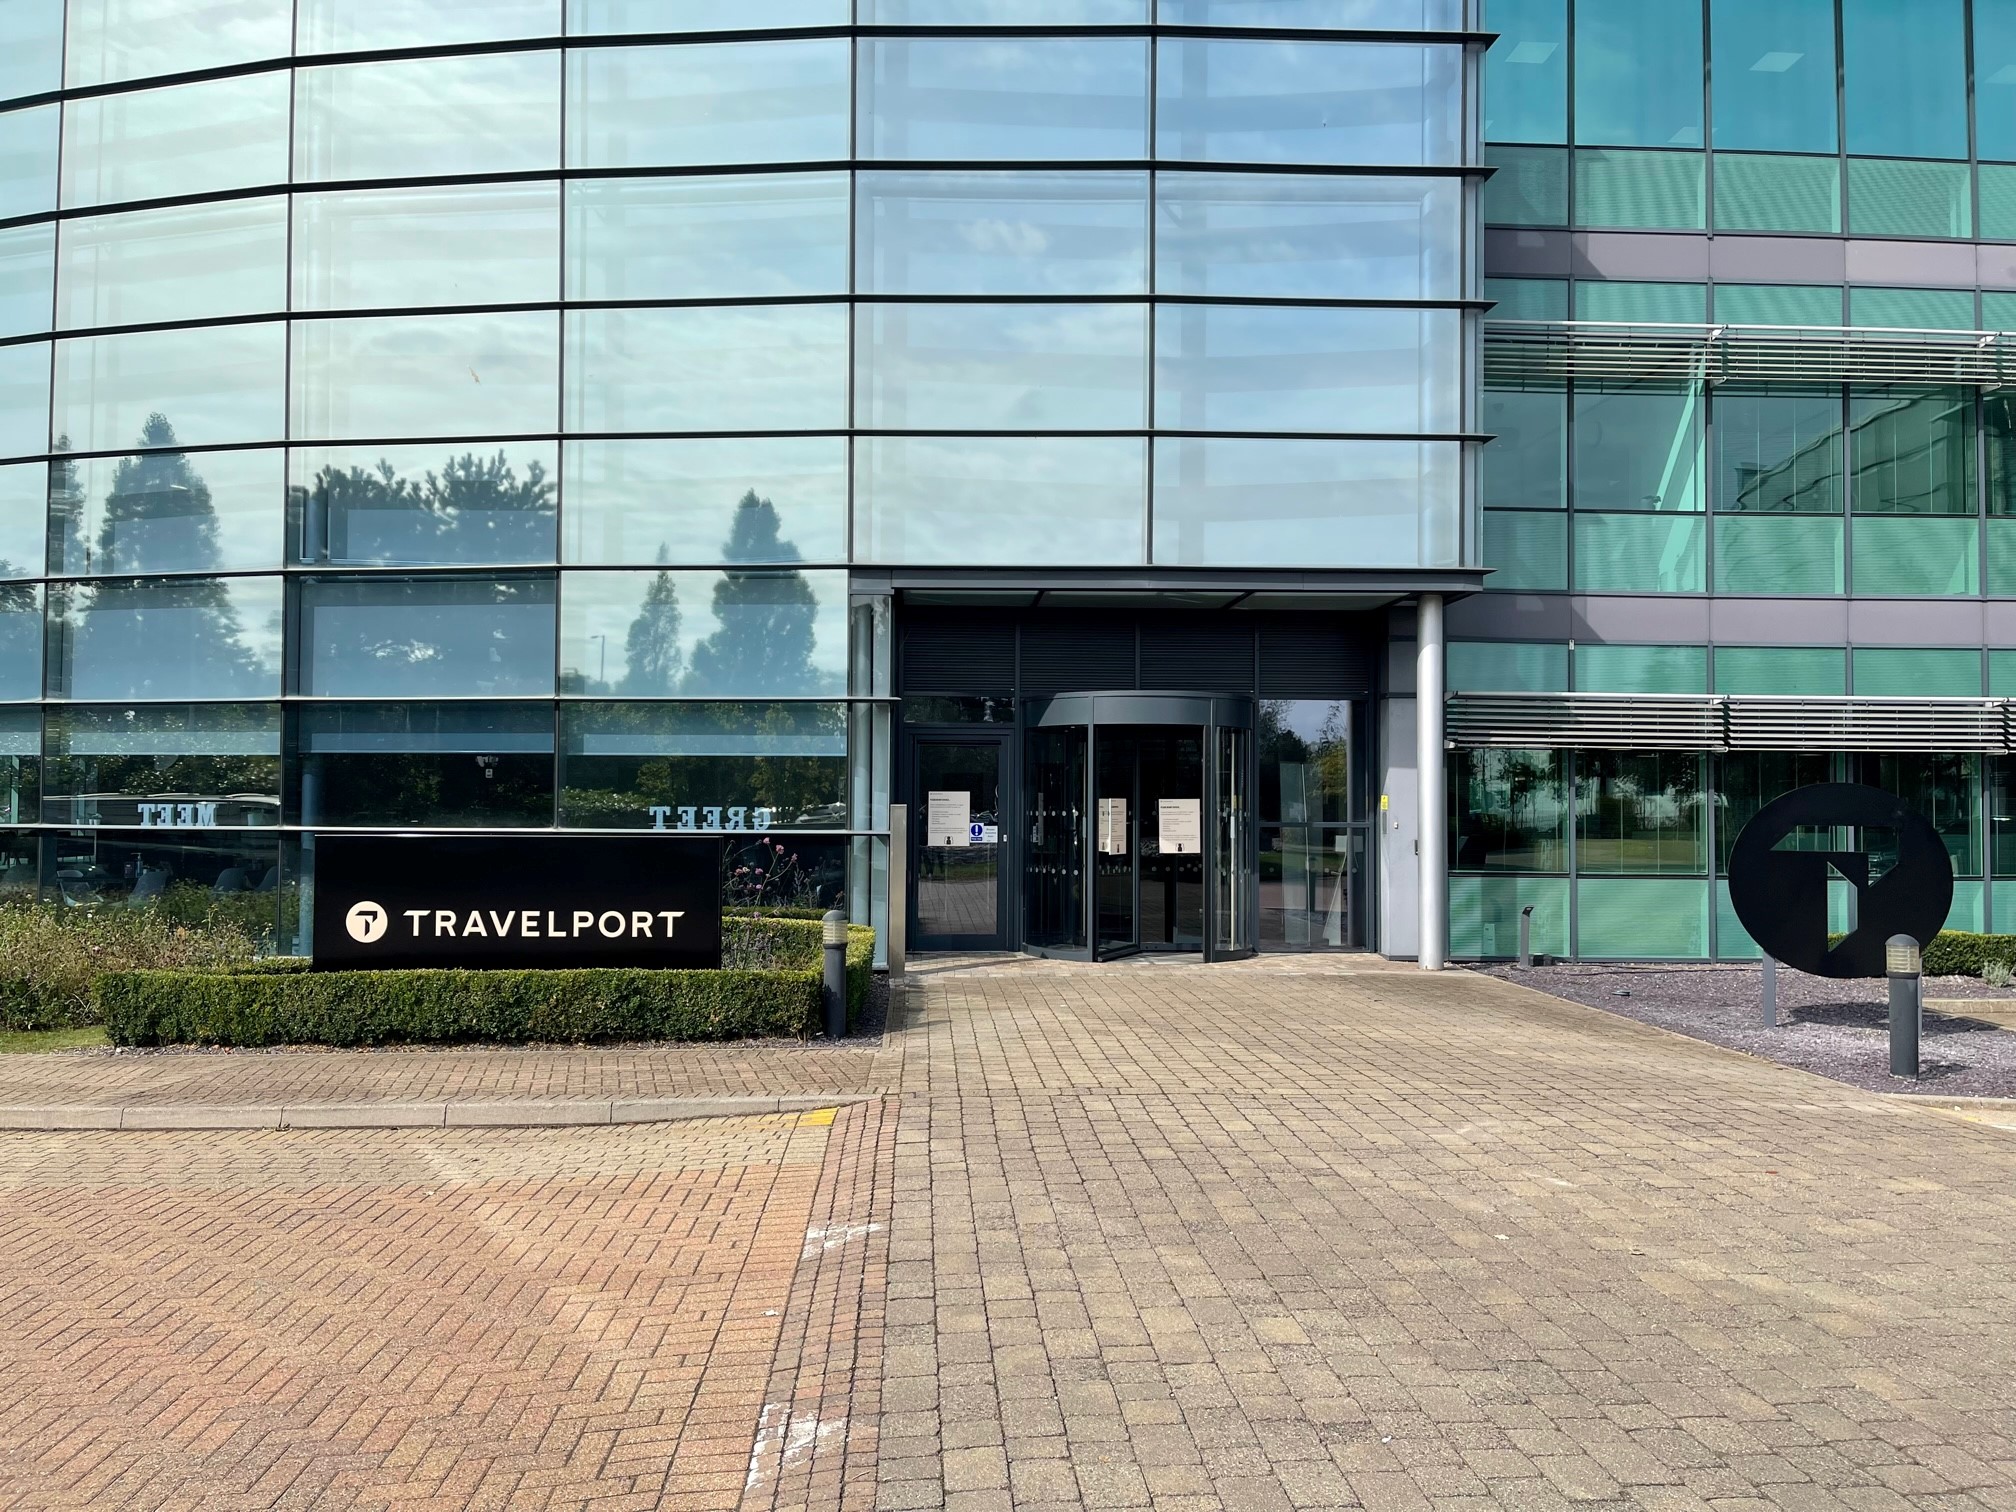 Travelport's Langley, U.K. office. An outside view of an office building with a Travelport sign.